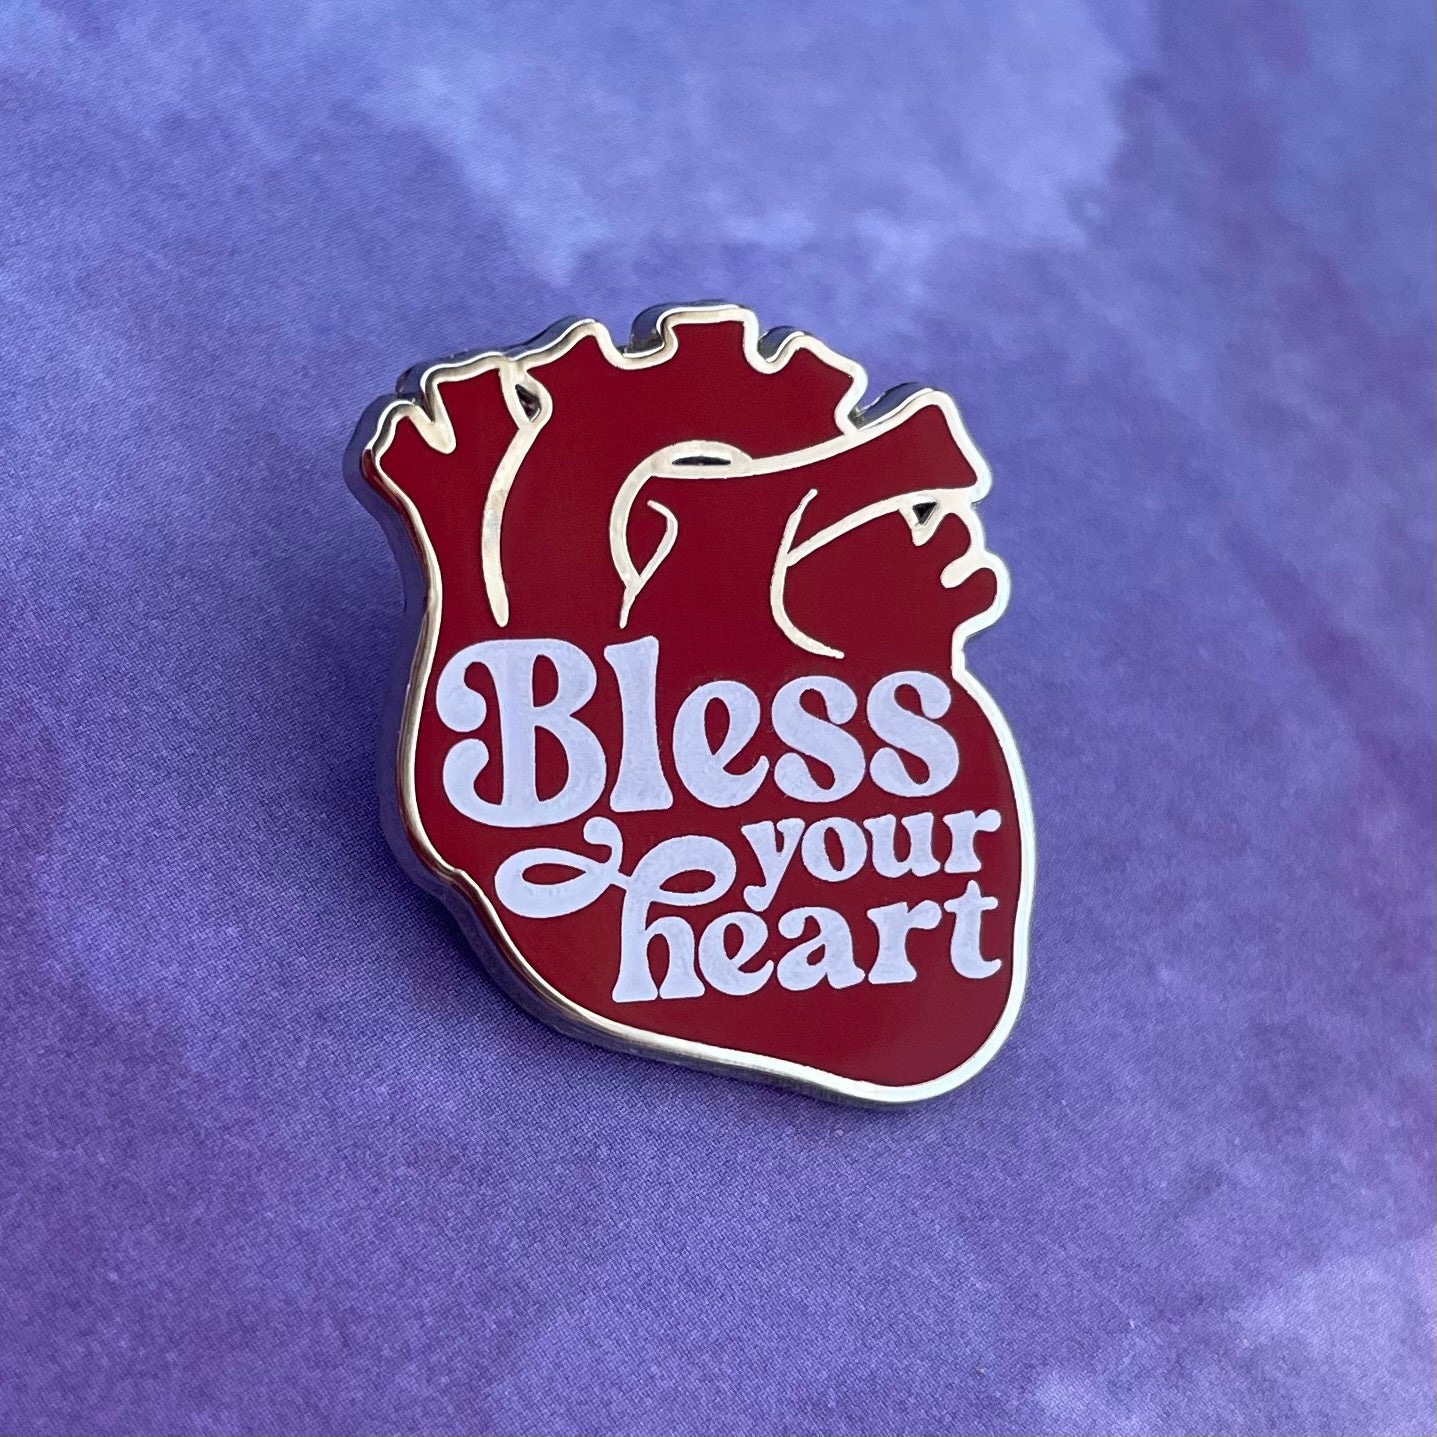 Bless Your Heart Pin - Rad Girl Creations Medical enamel pins